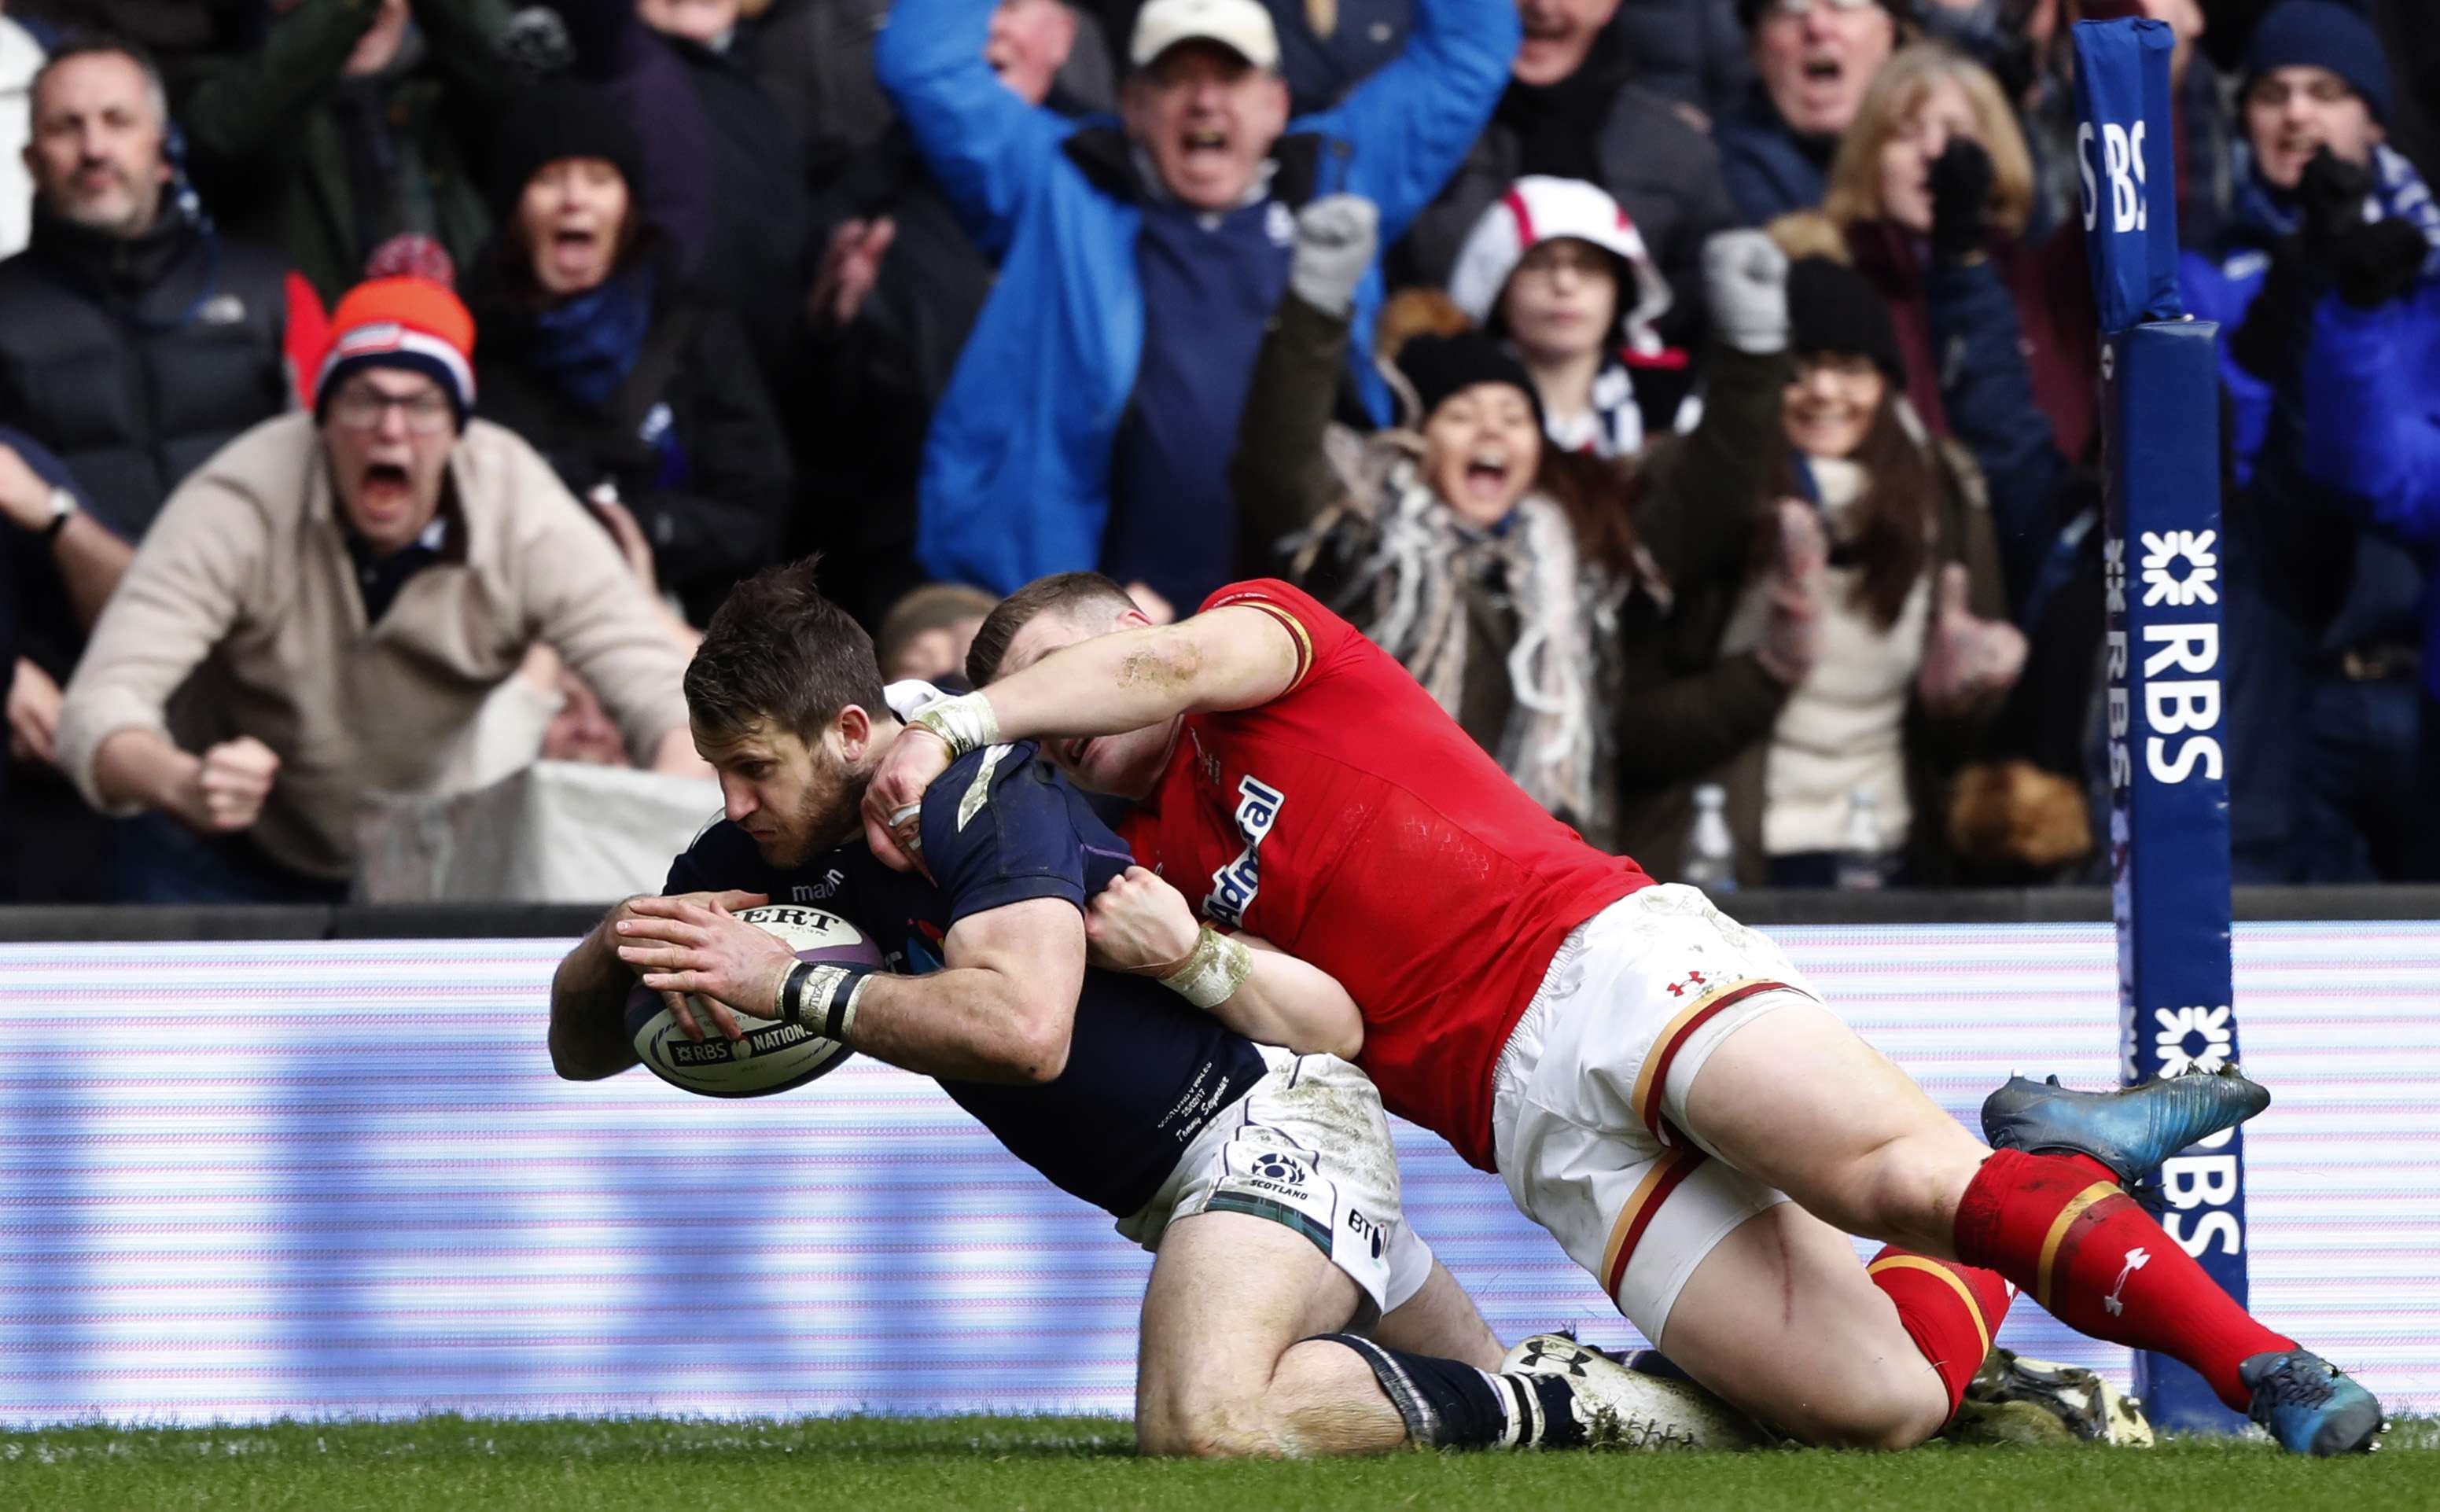 Scotland’s Tommy Seymour scores his team’s first try in their Six Nations encounter against Wales at Murrayfield, Edinburgh. Photo Reuters